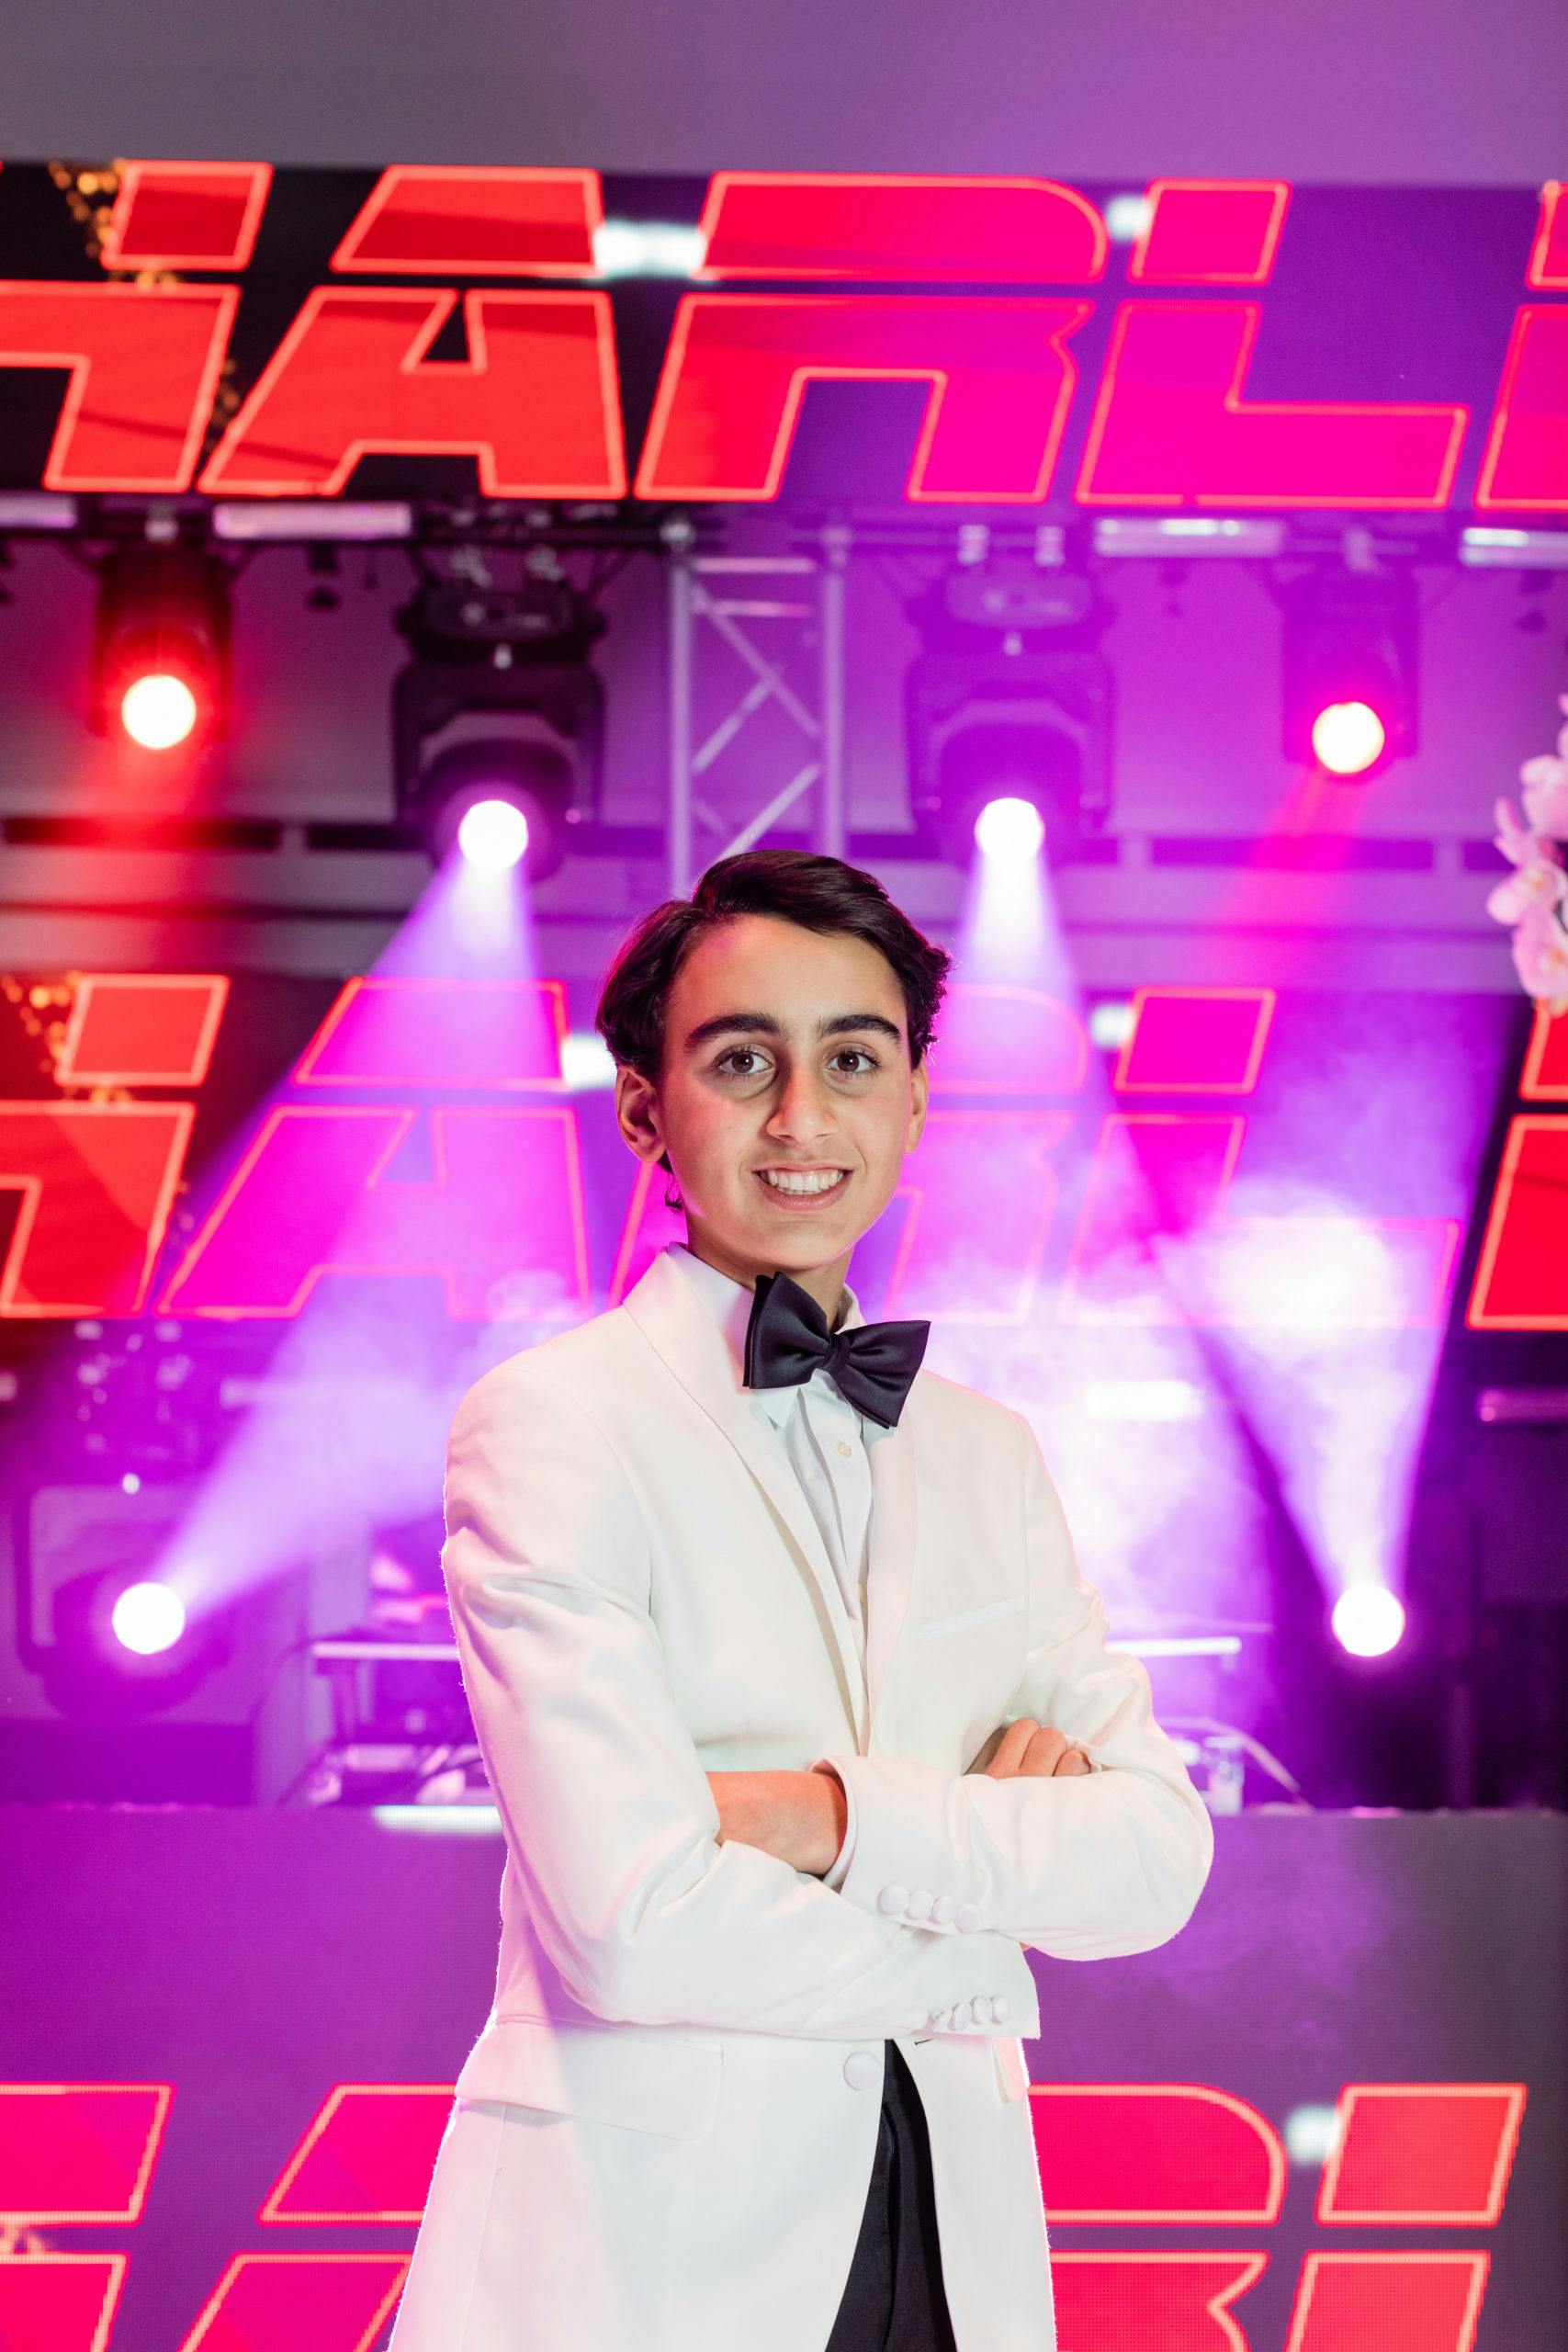 Bar Mitzvah boy stand in front of pink and purple lighting display | PartySlate